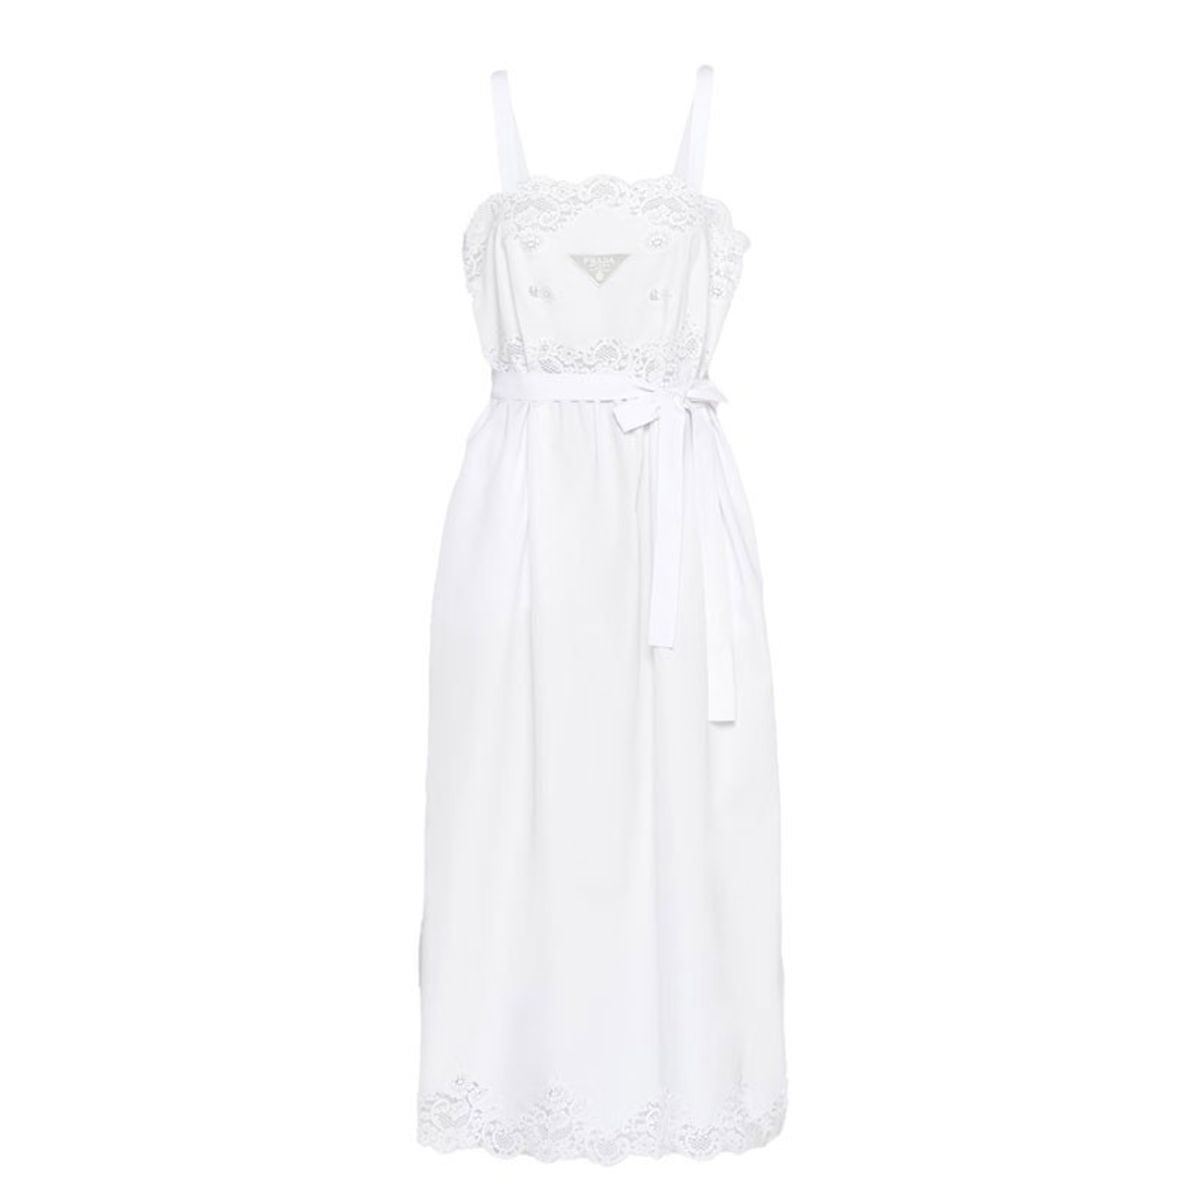 Embroidered Poplin and Lace Dress